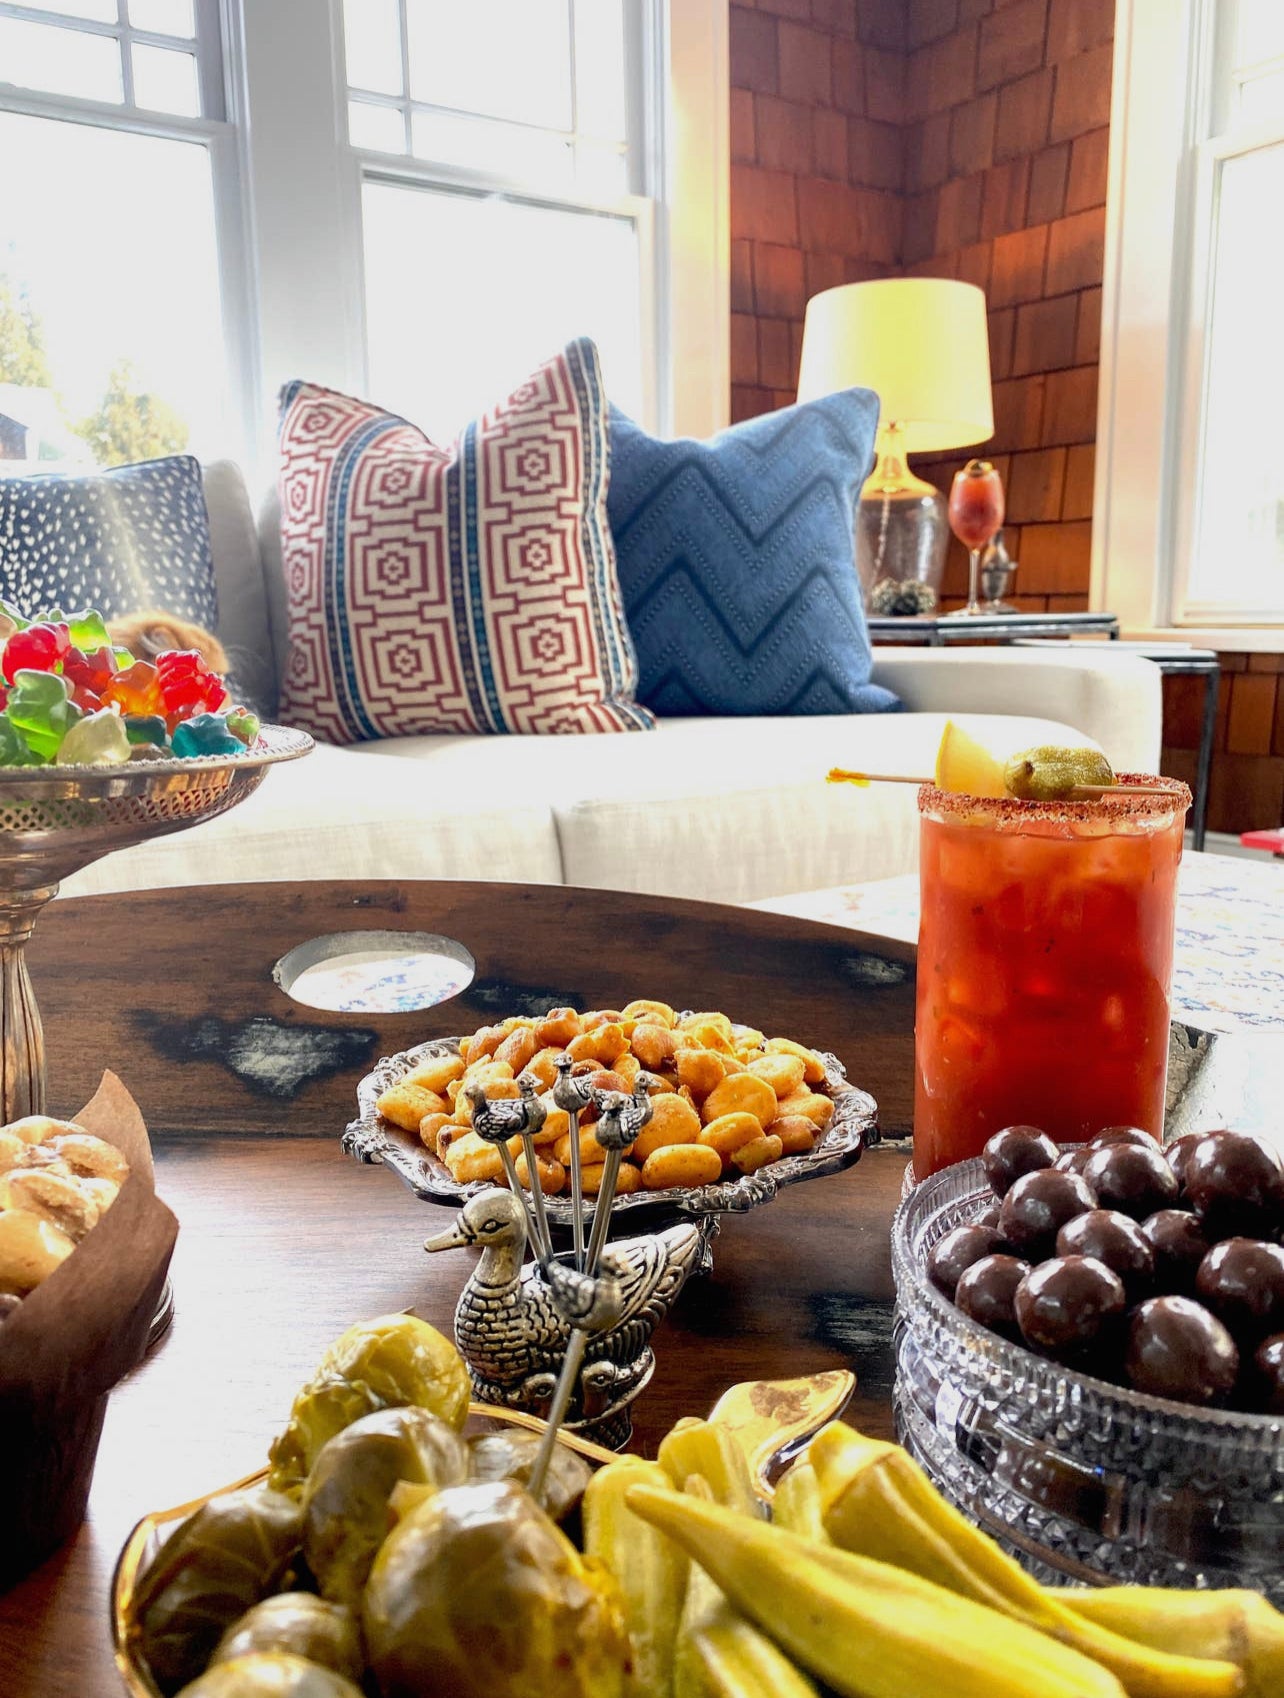 a bloody mary cocktail garnished with green olives sits on a coffee table in a family room surrounded by bowls of snacks